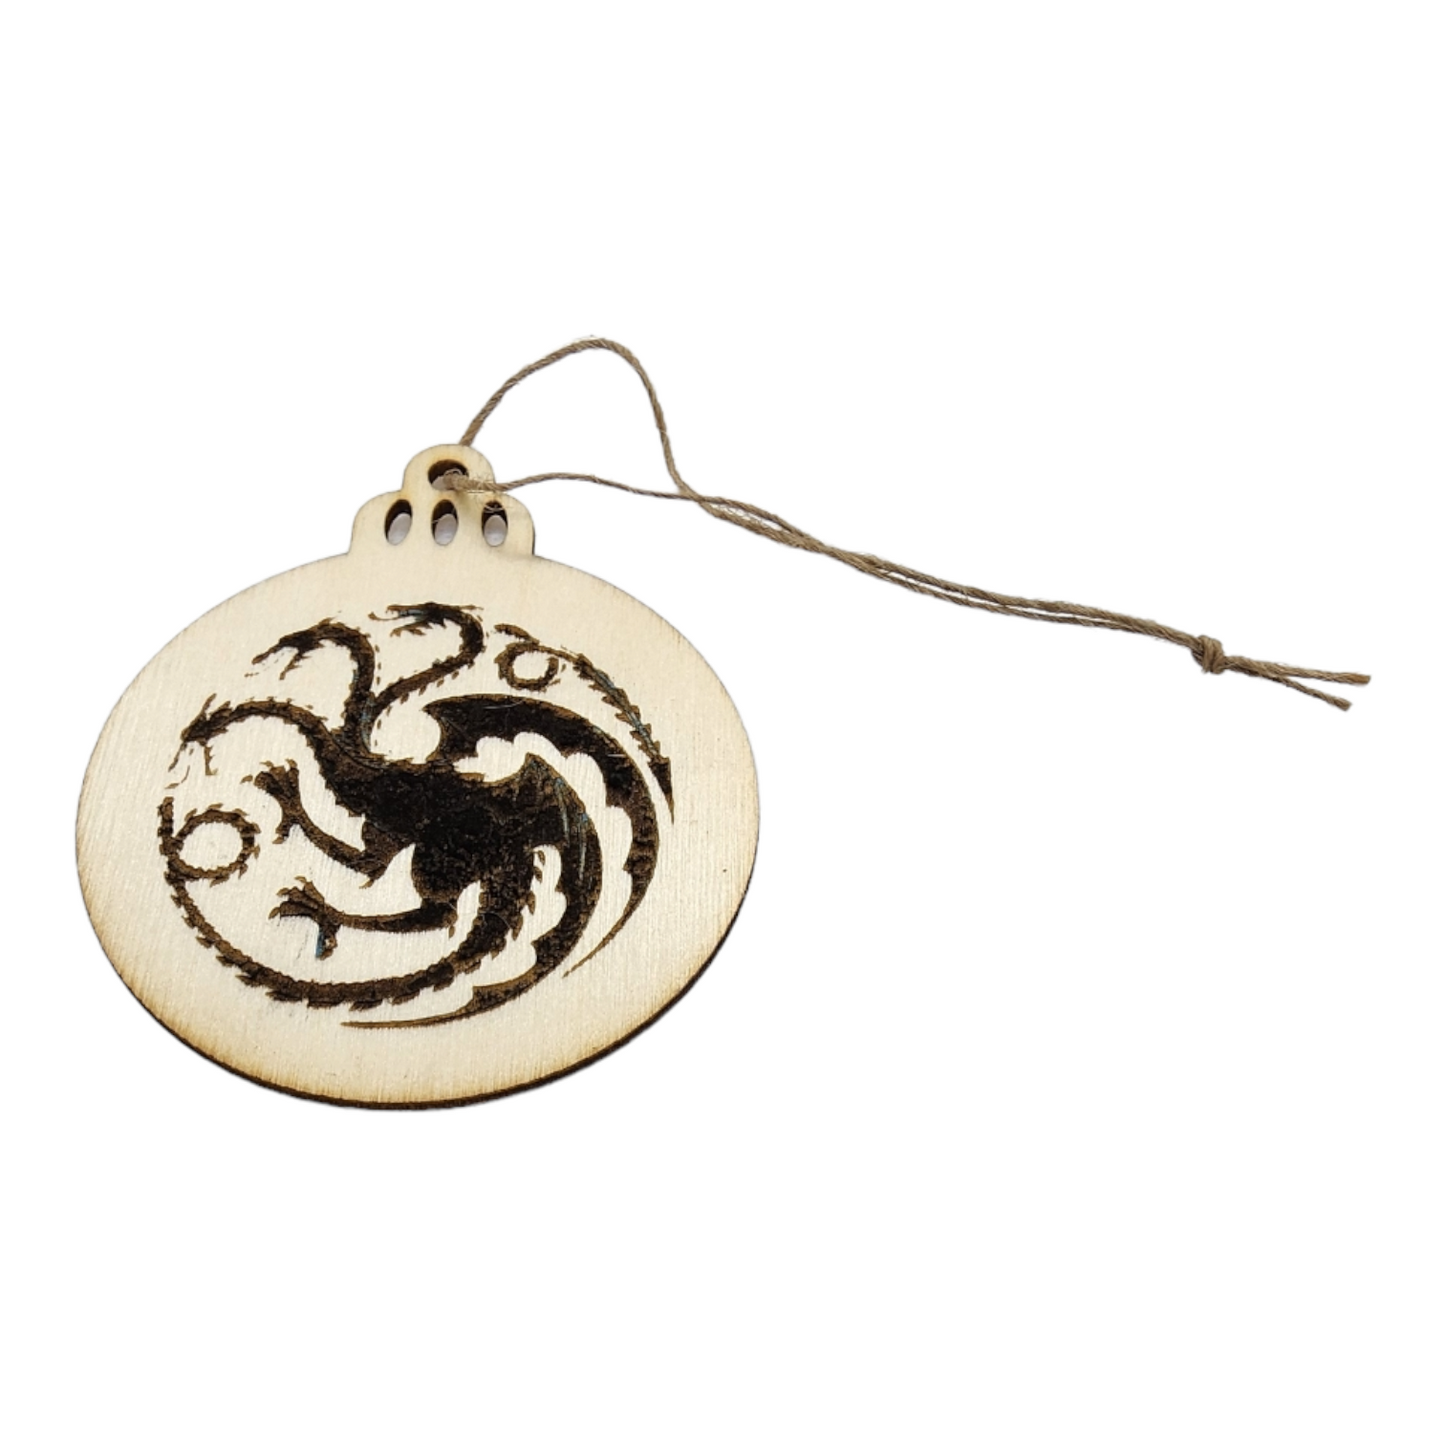 Wooden Ornament with Wood Burned Design - Dragon